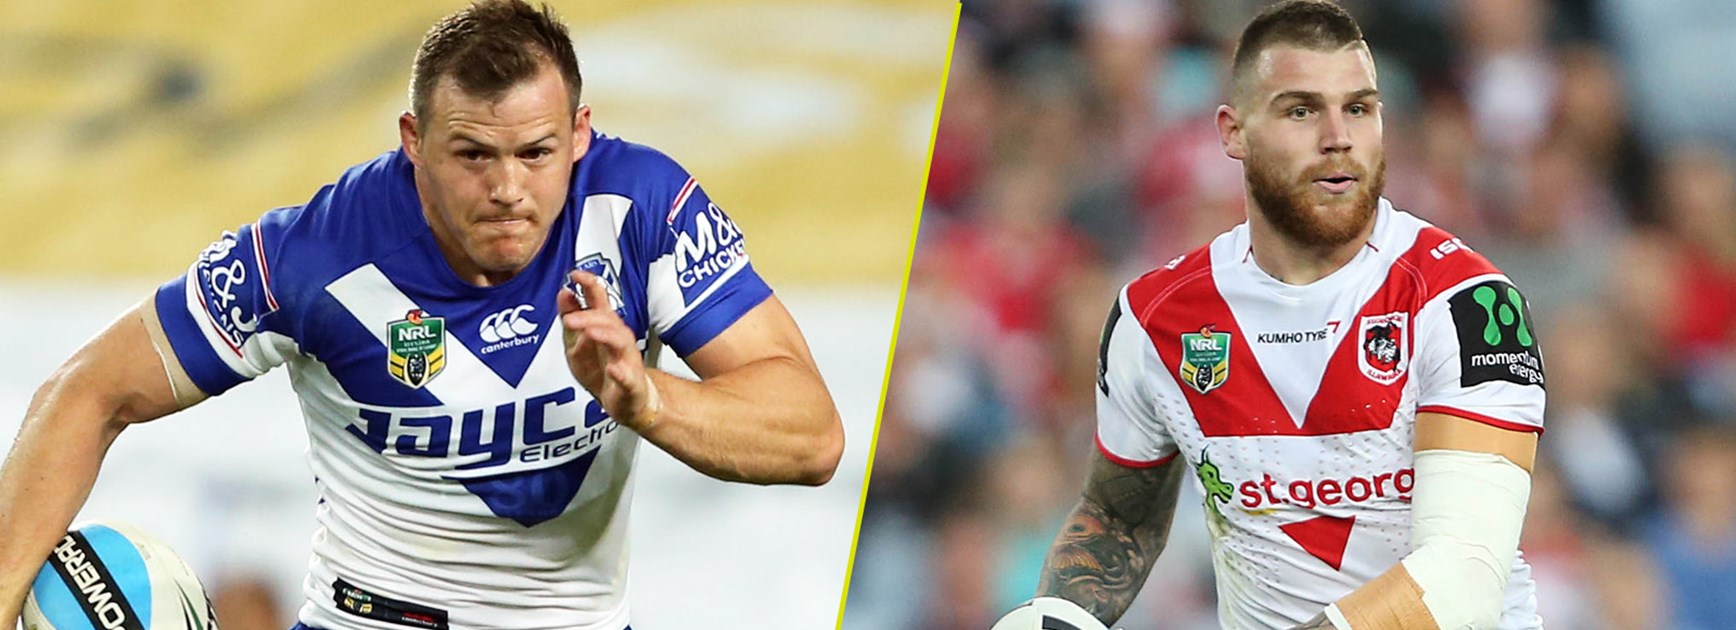 NSW teammates Brett Morris and Josh Dugan will line up against each other on Saturday night.